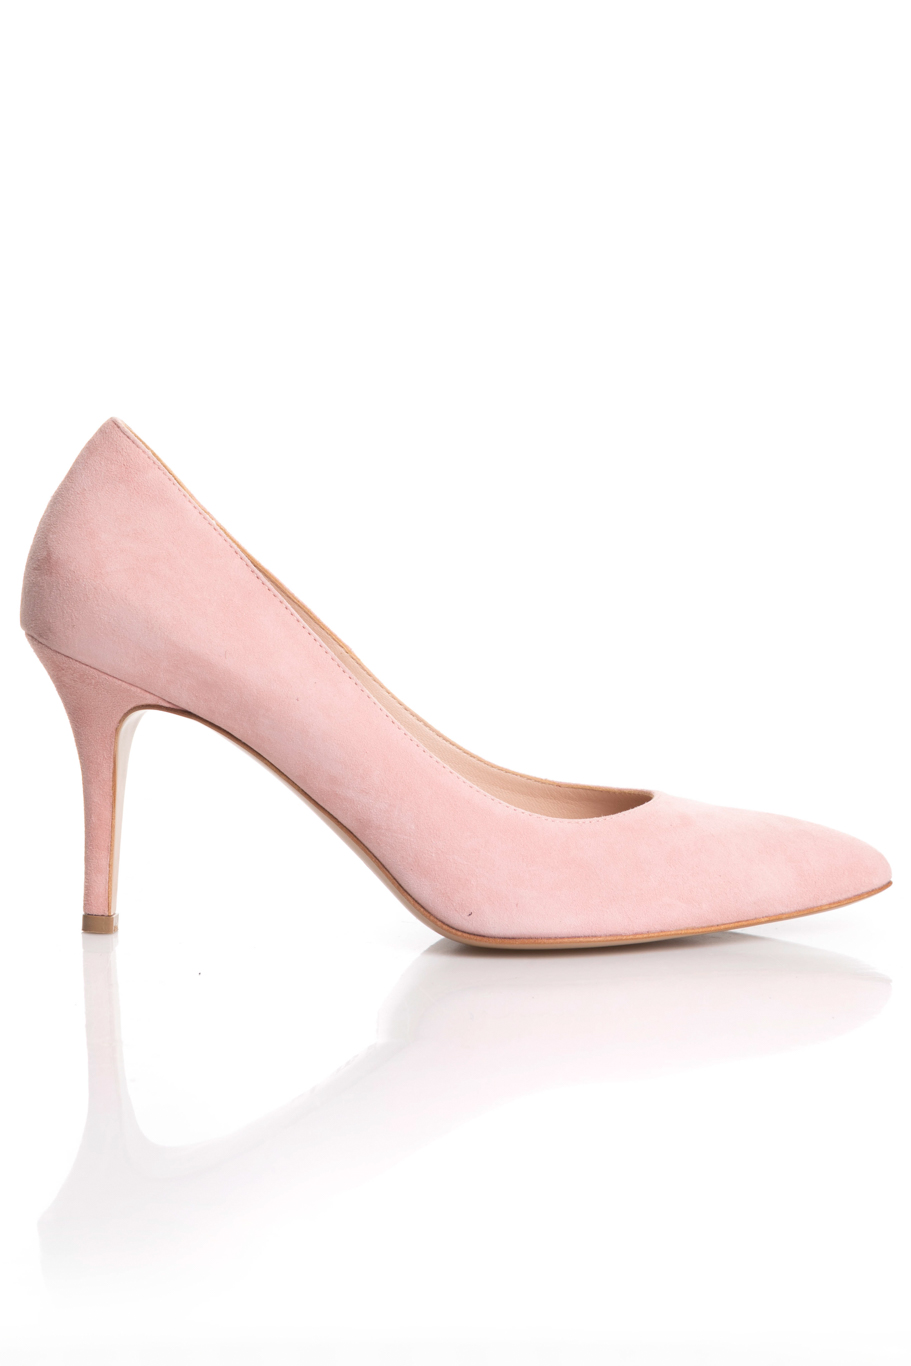 TUOM 00076 S21 PINK SUEDE 12